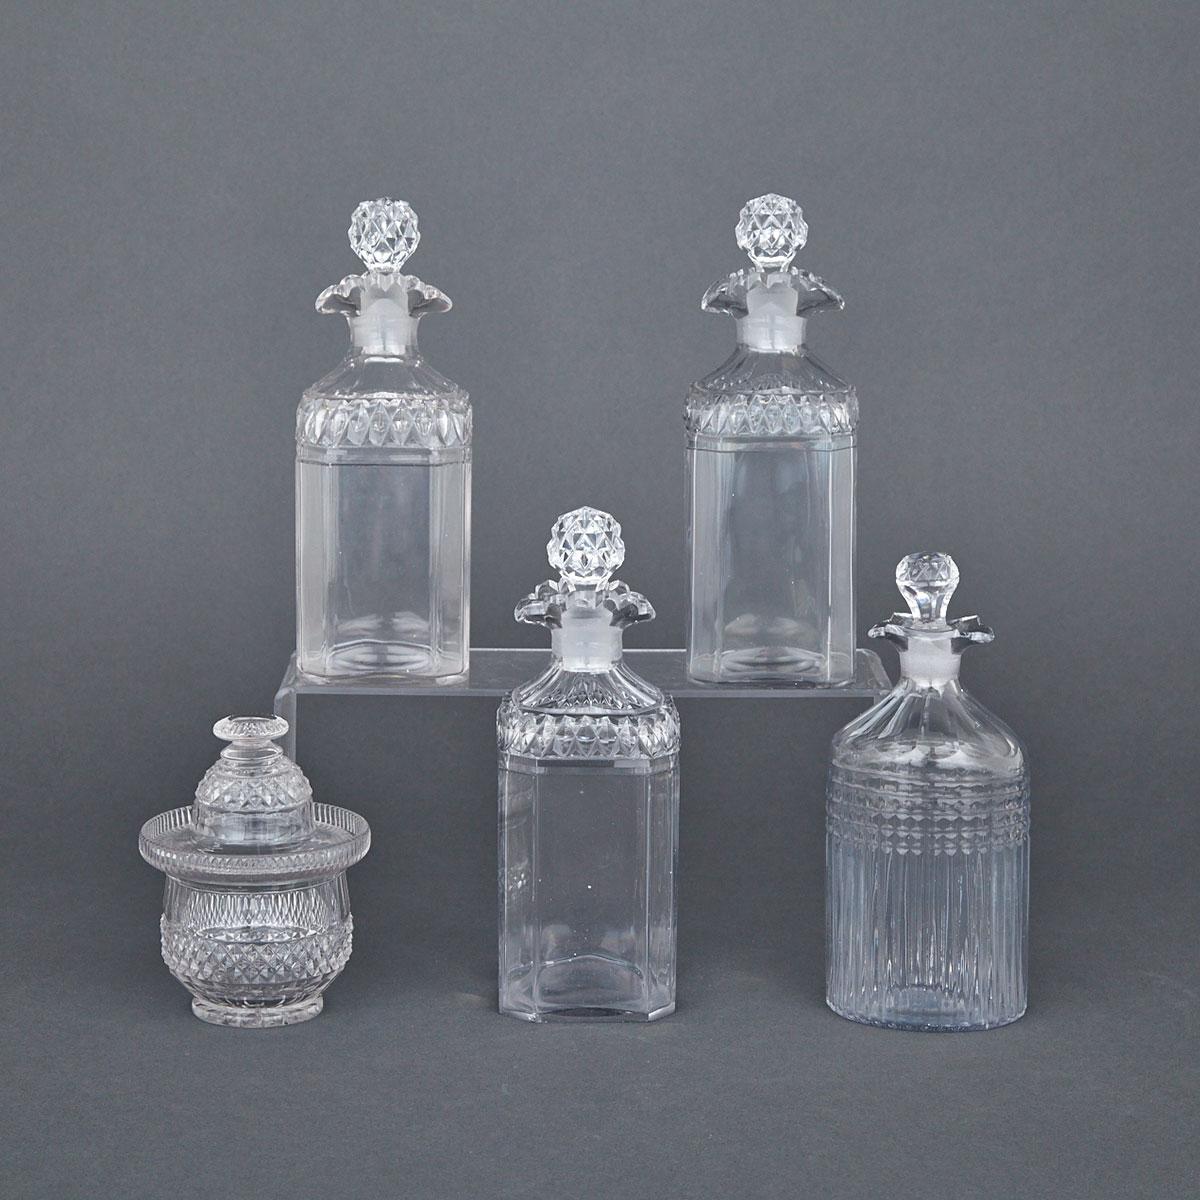 Anglo-Irish Cut Glass Covered Sweetmeat Jar and Four Various Spirit Decanters, early 19th century